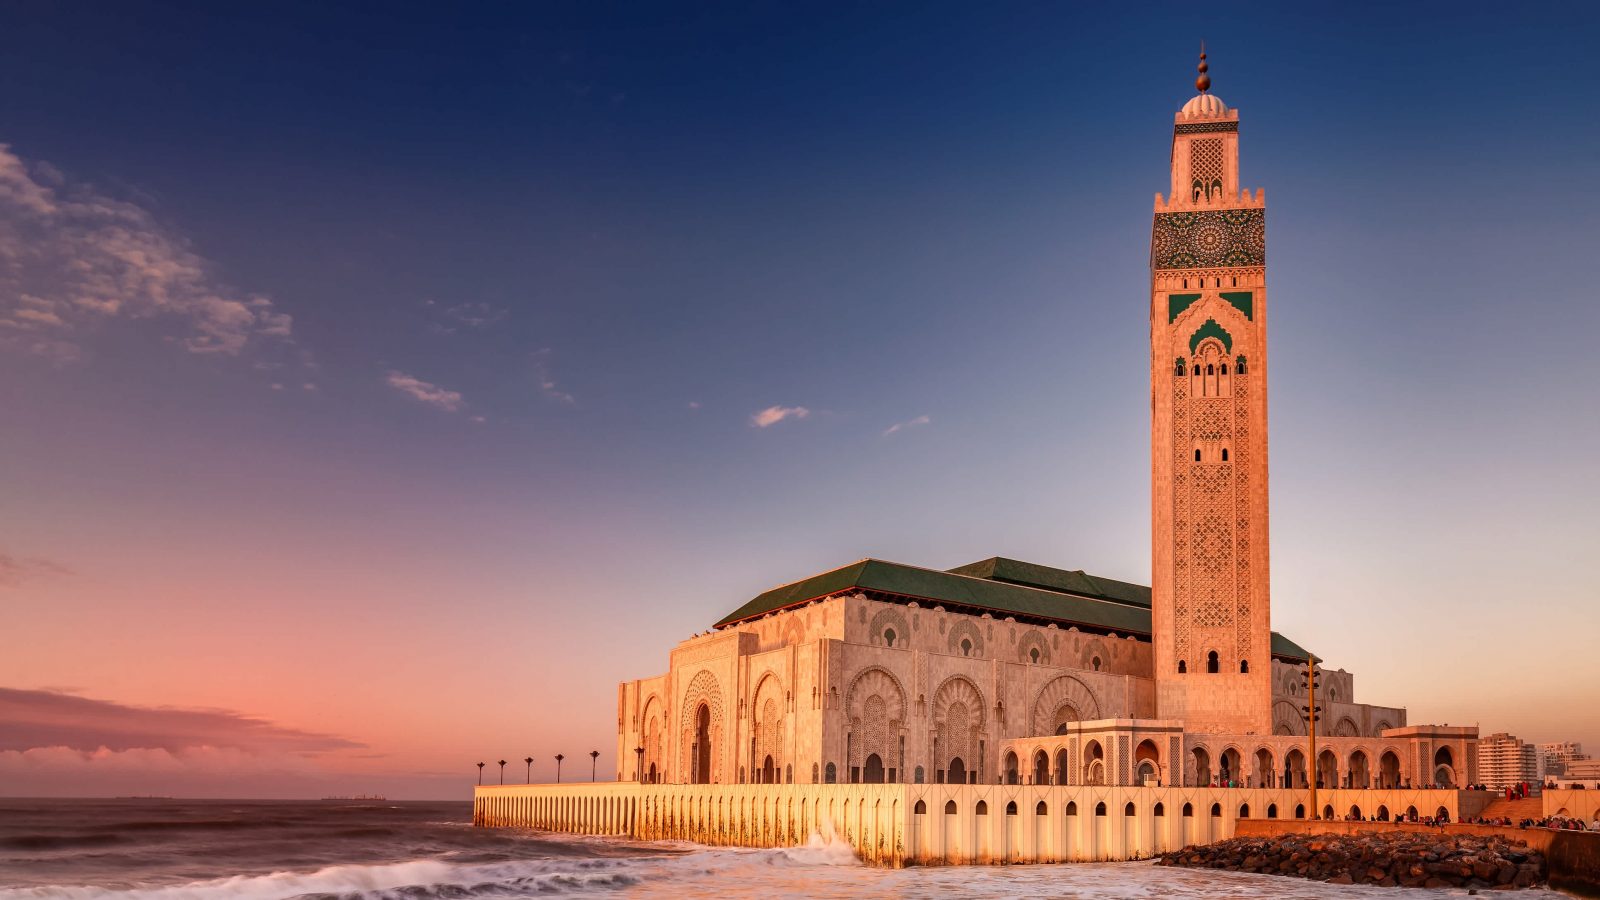 Where on Earth Are You? 🌍 Only a Geography Specialist Can Get a Perfect Score on This Quiz Casablanca, Morocco